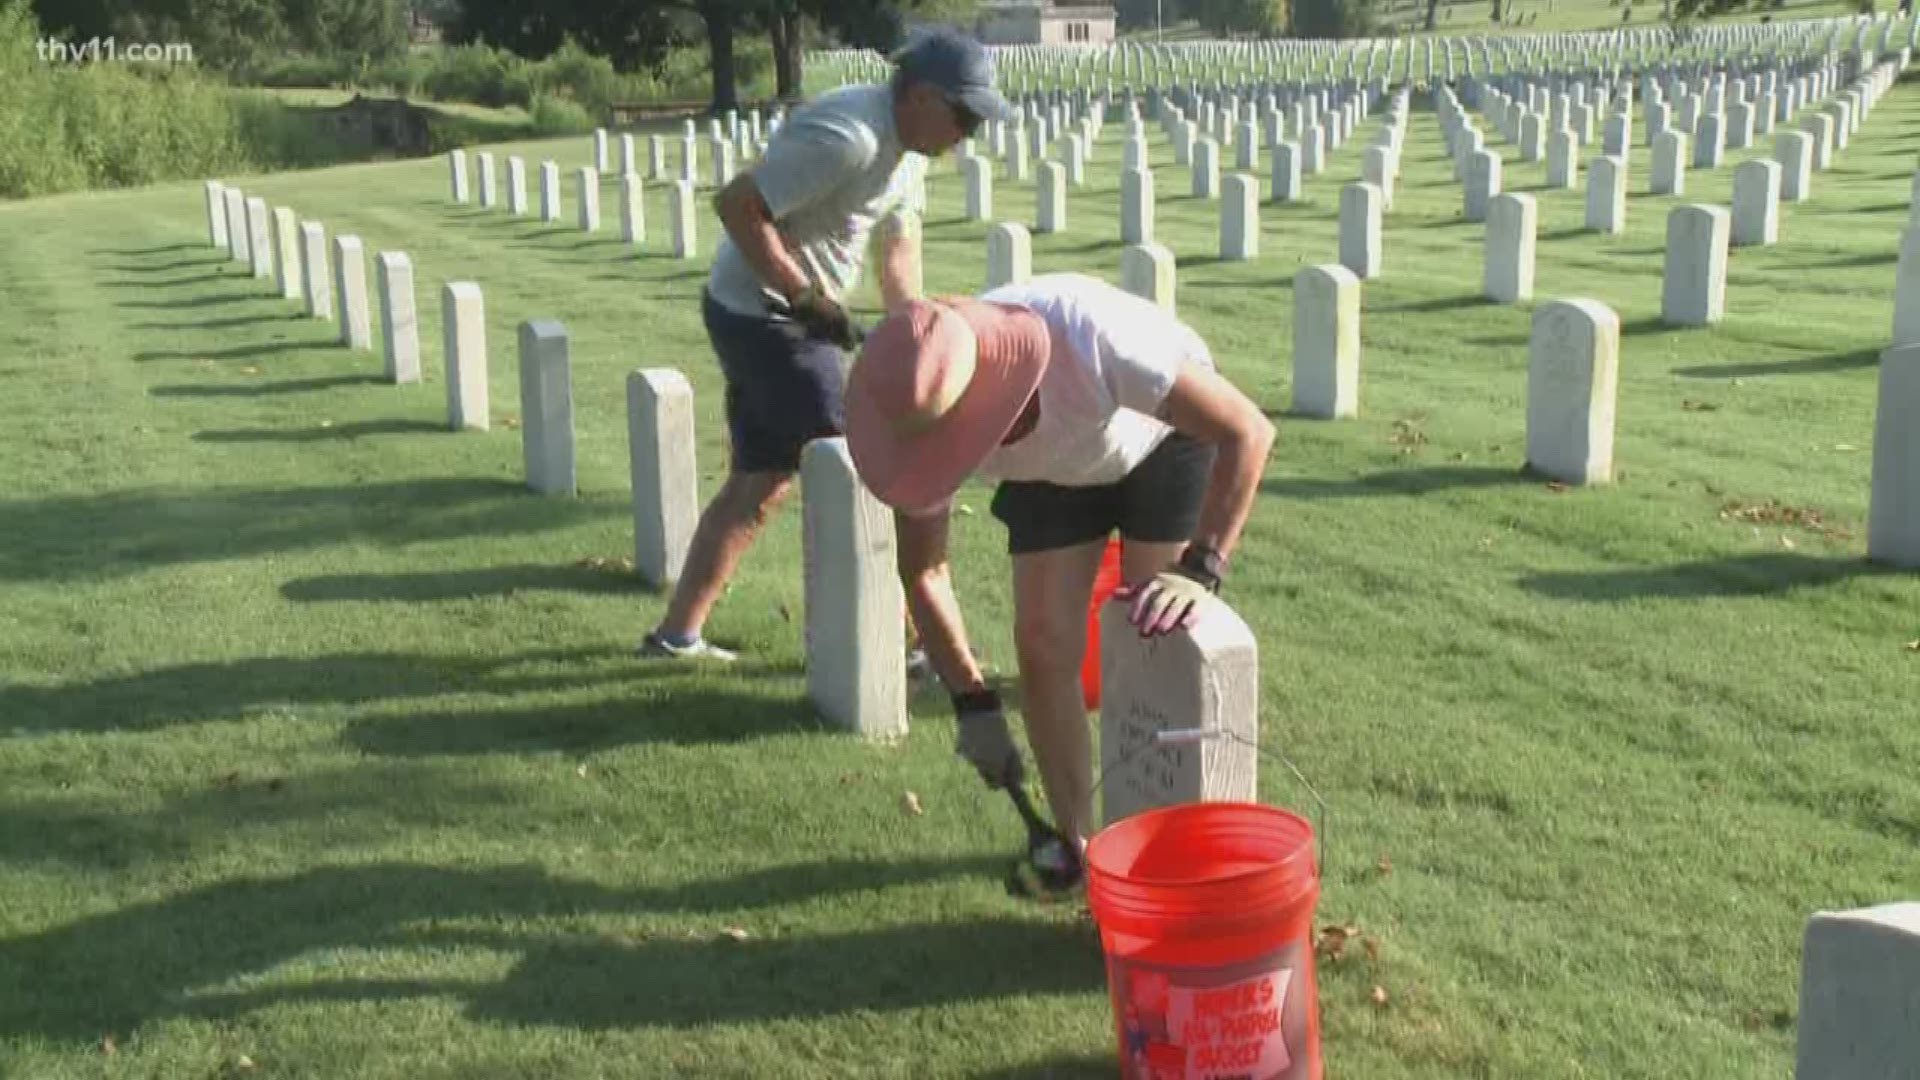 'Carry the Load' honored those killed in 9/11 at the Little Rock National Cemetery with a day of volunteering.